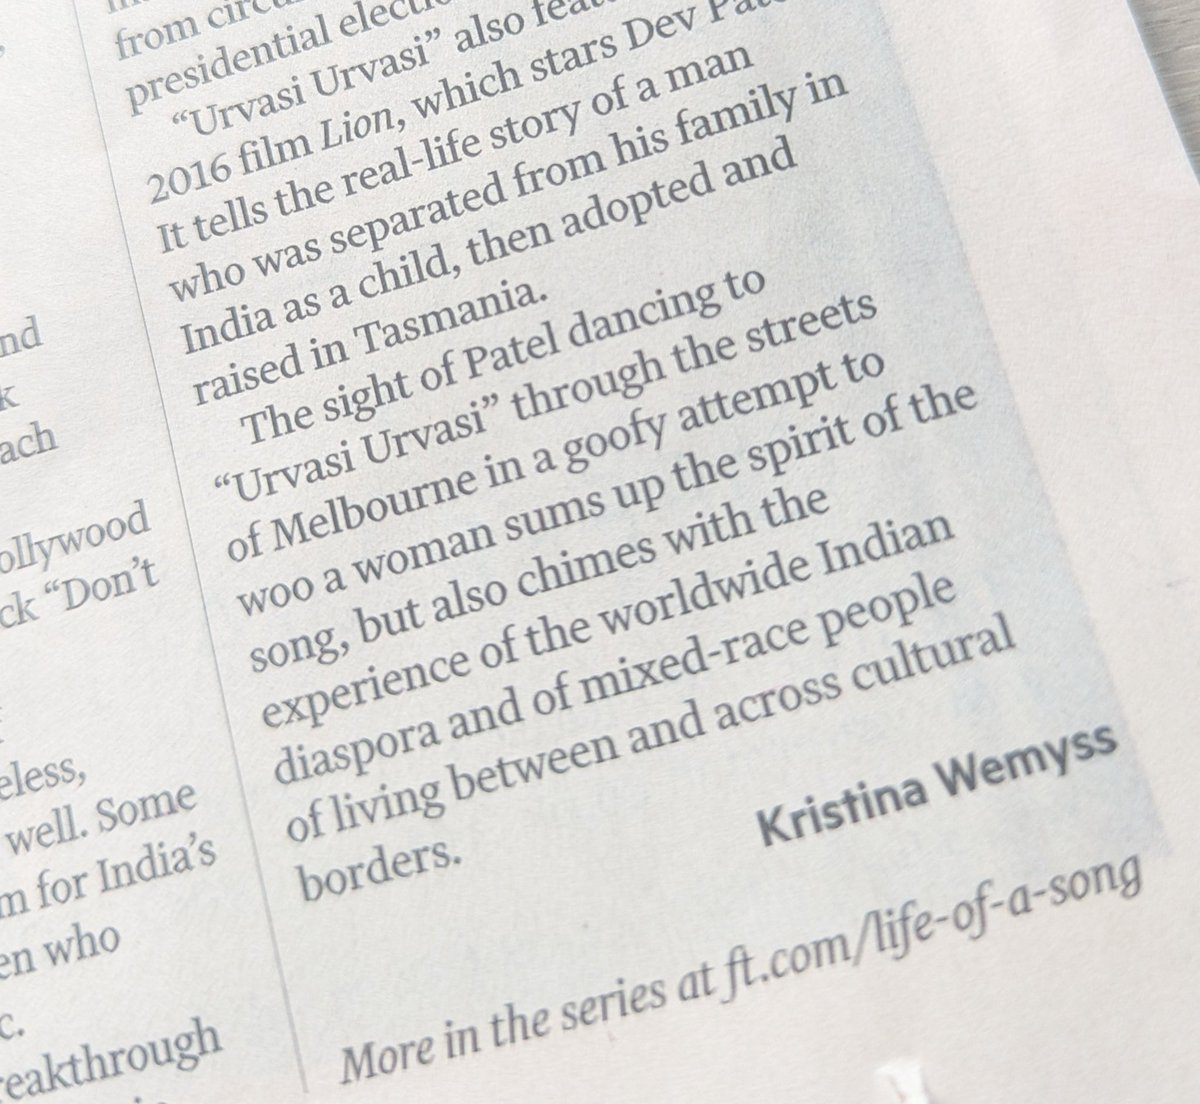 In print in the @ftweekend Life of a Song series today. I wrote about a Tamil song from one of my mum's old cassettes which I used to dance to as a kid. 'Urvasi Urvasi' has had quite the musical journey since then which you can read about below 👇 ig.ft.com/life-of-a-song…